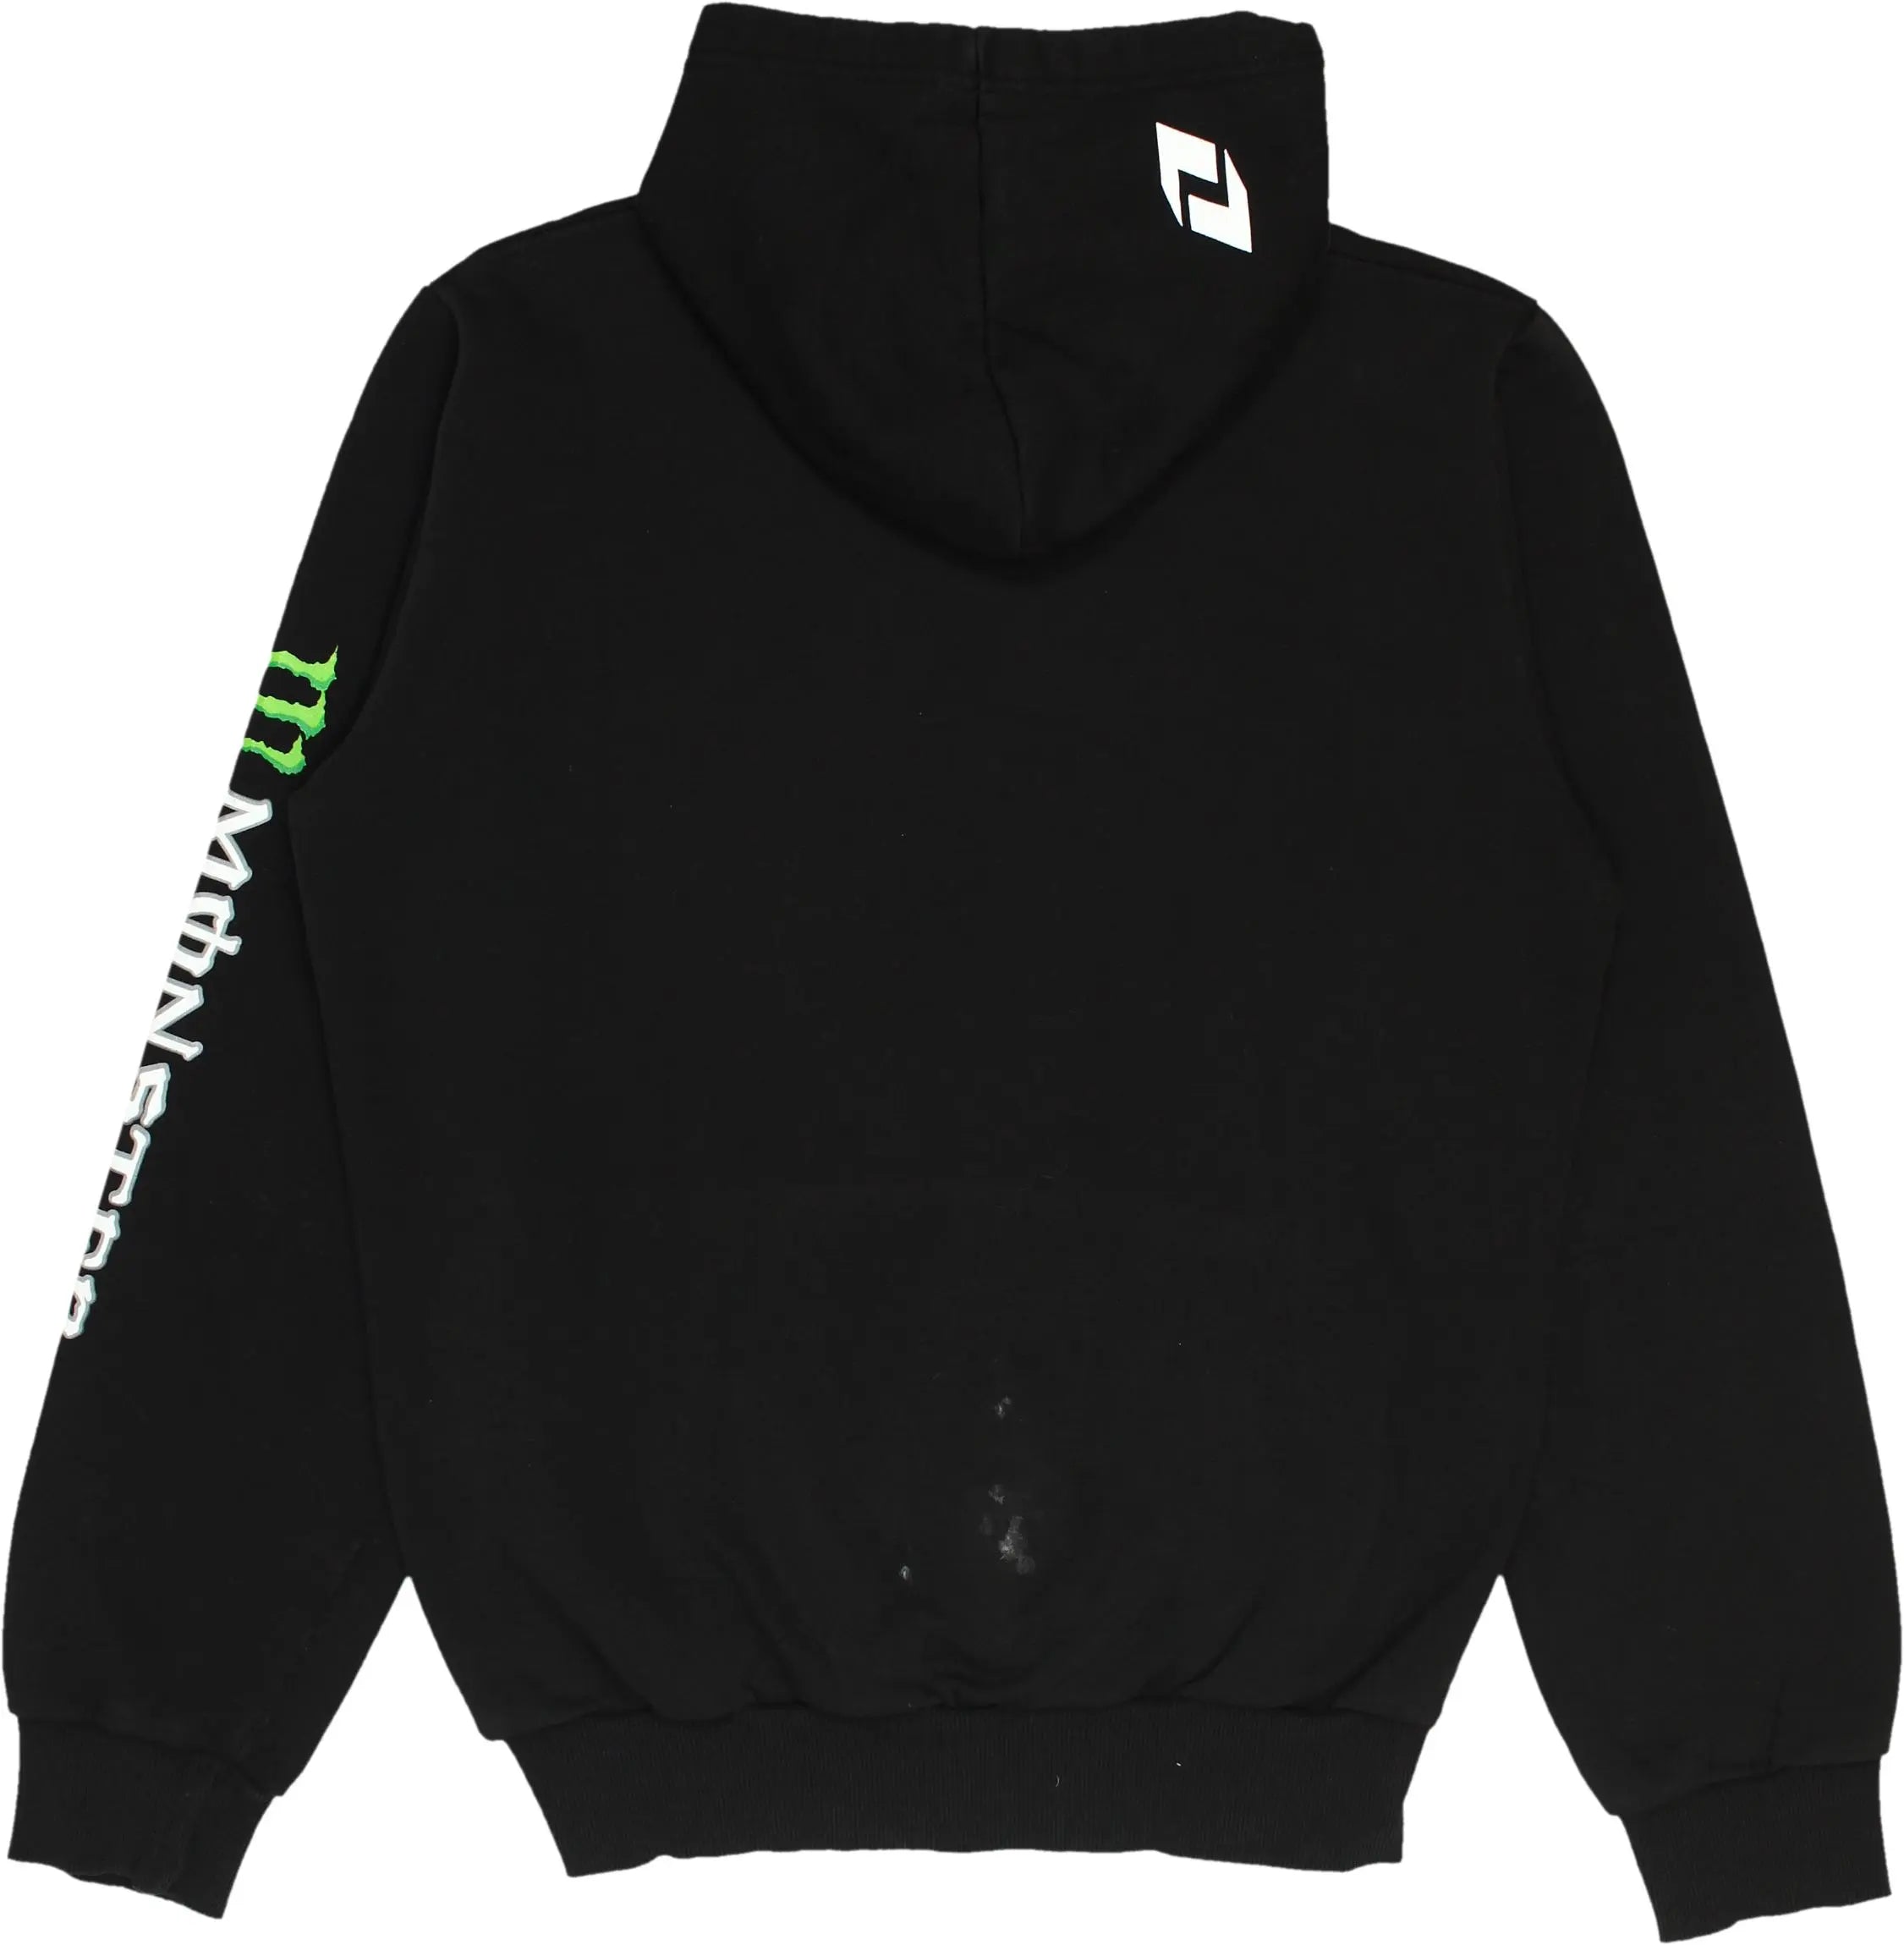 Monster Energy - Black Monster Energy Hoodie- ThriftTale.com - Vintage and second handclothing